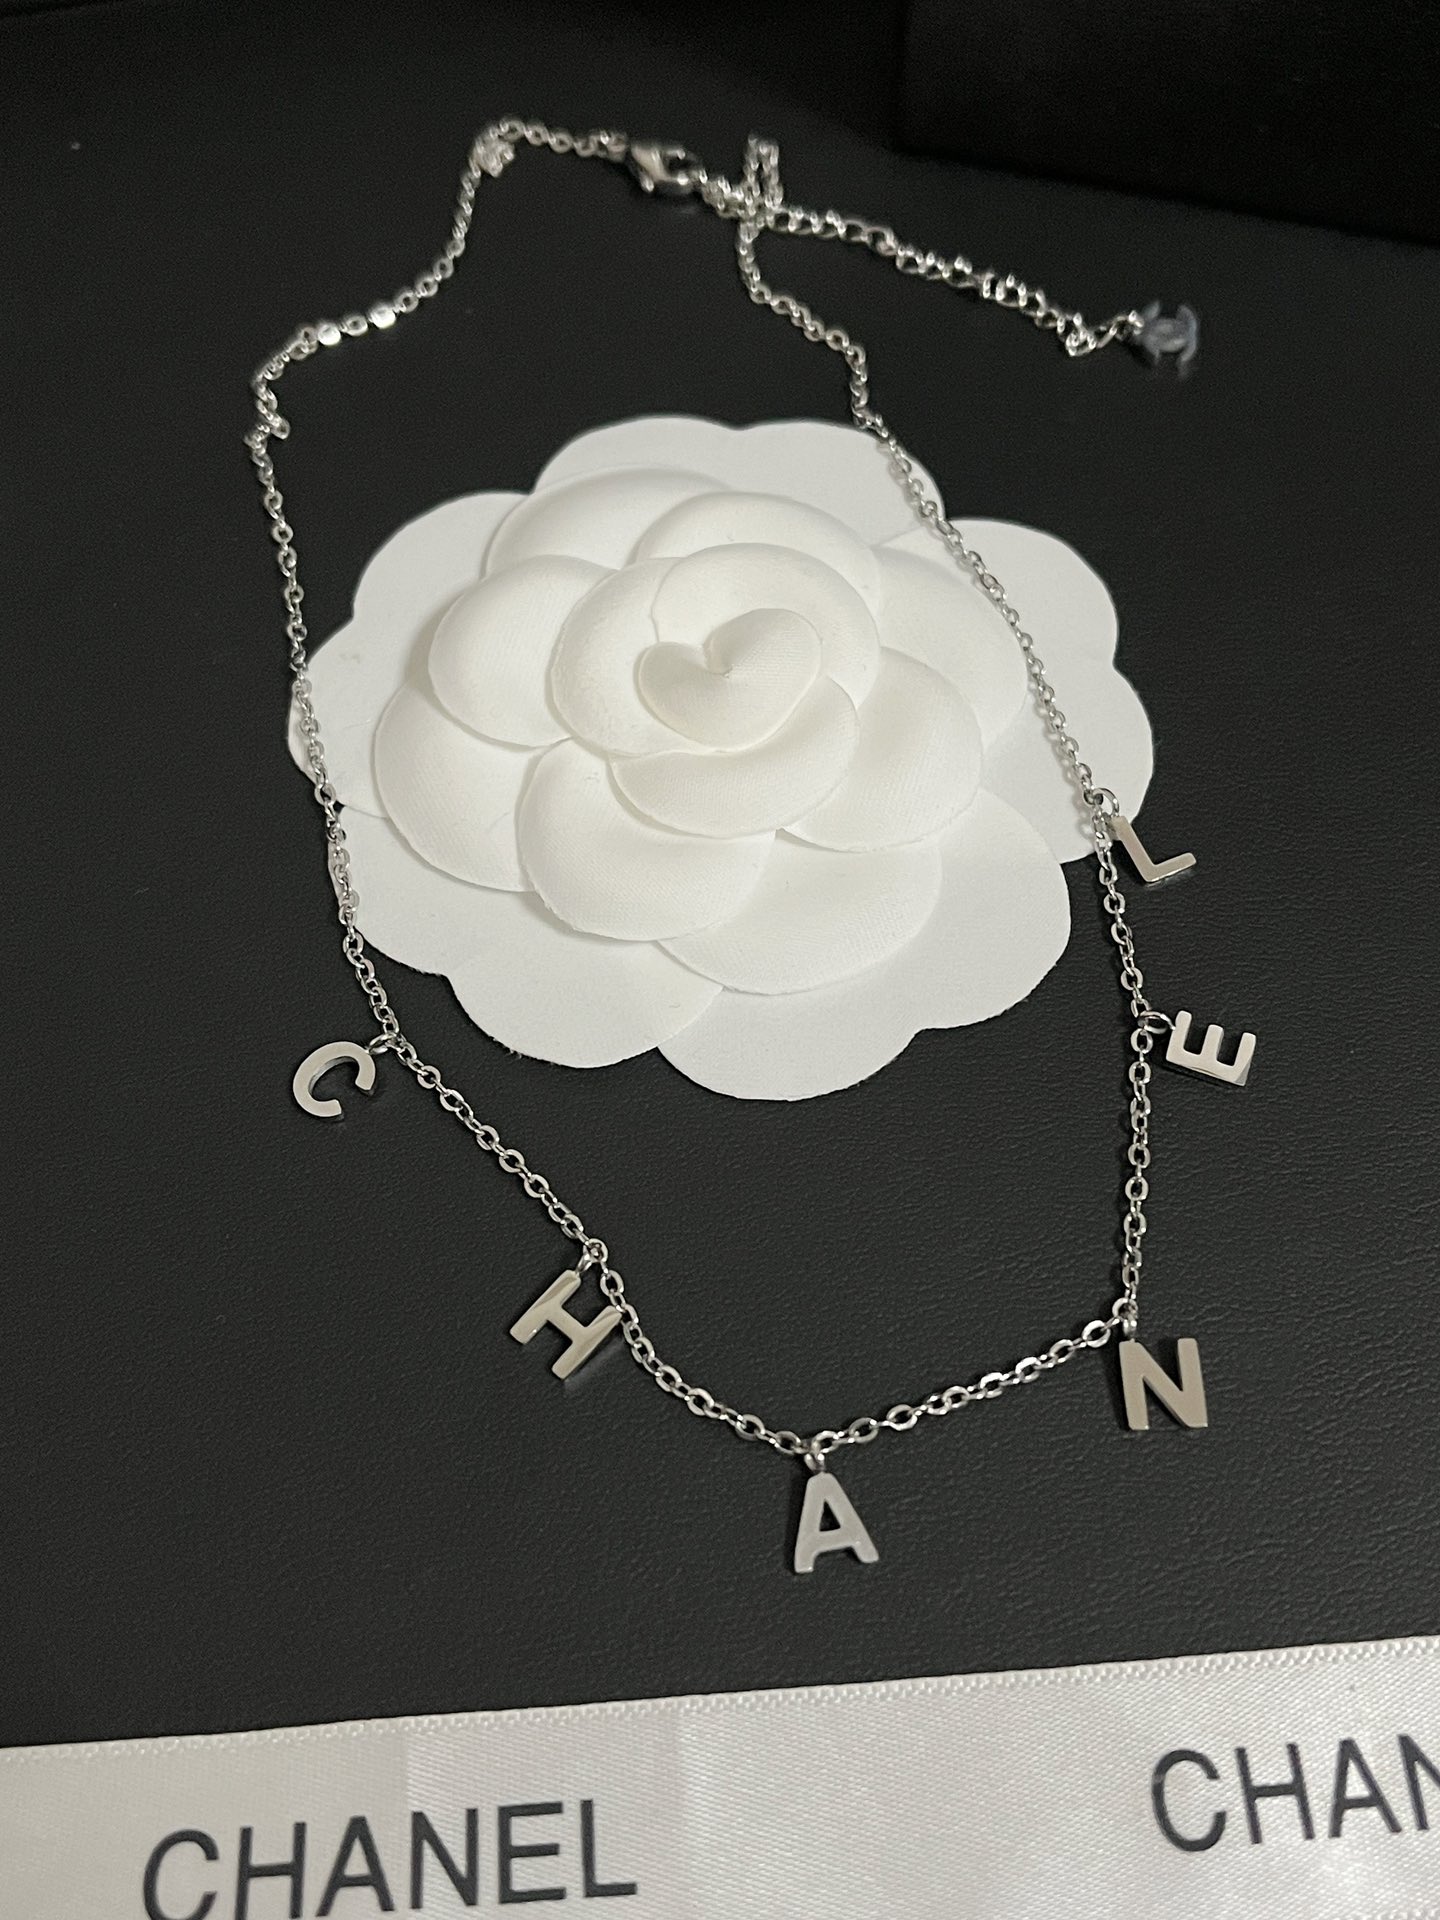 X548  Chanel necklace